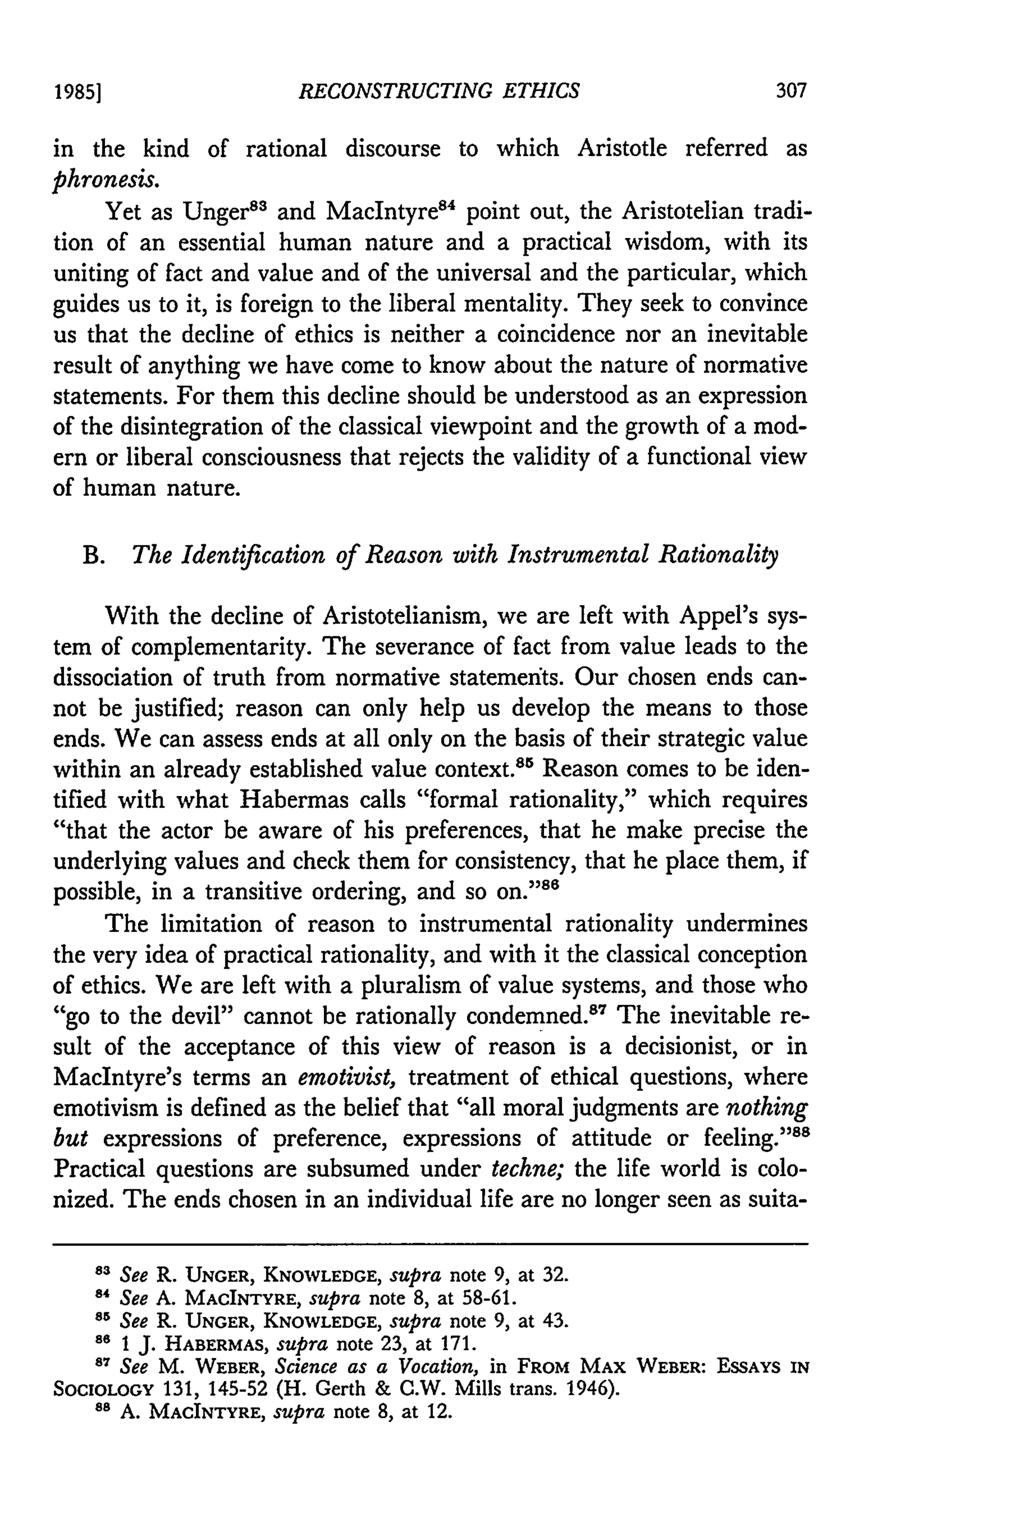 19851 RECONSTRUCTING ETHICS in the kind of rational discourse to which Aristotle referred as phronesis.